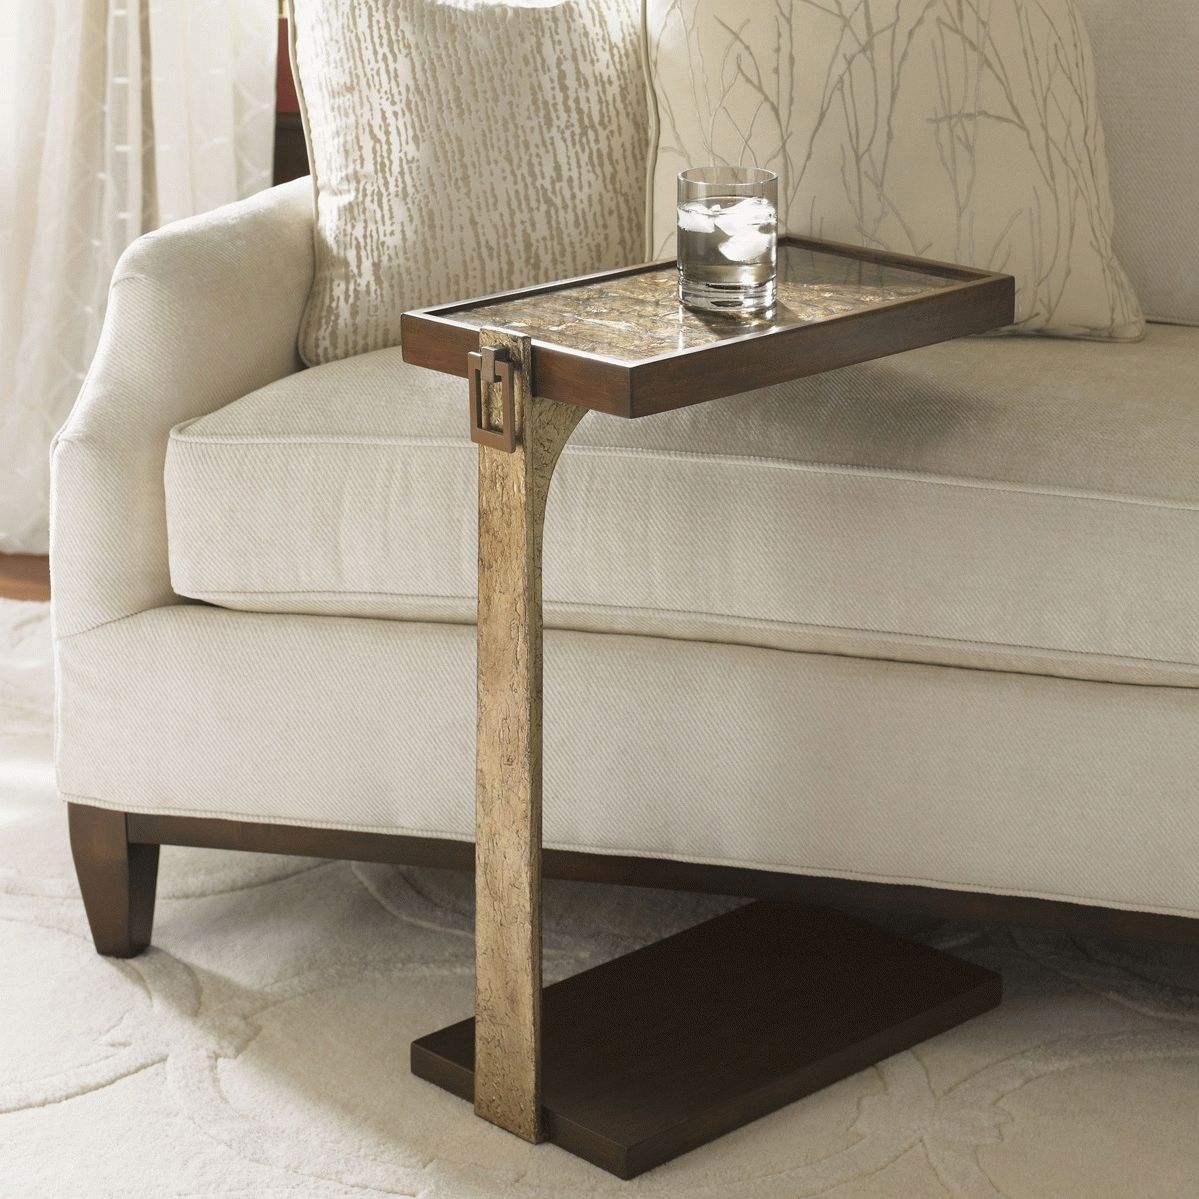 Furniture : Tall Slim End Table Super Small With Drink Holder Drawer With Sofas With Drink Tables (Photo 3 of 10)